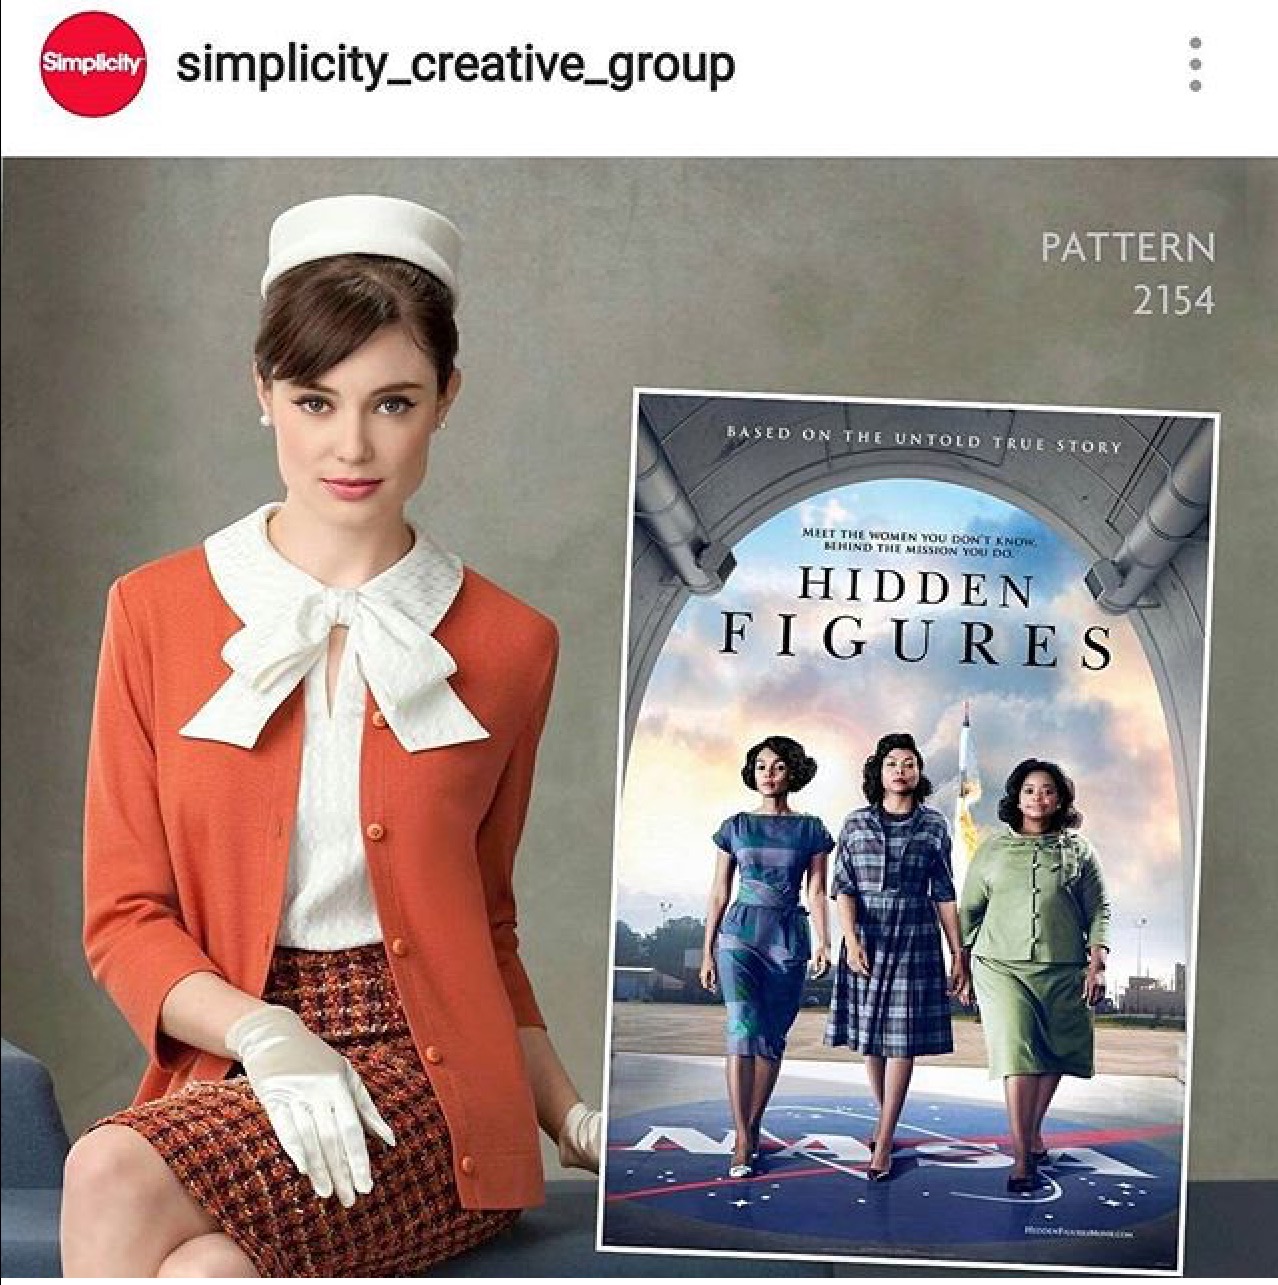 Diary of a Sewing Fanatic: Why didn't Simplicity Patterns just apologize?